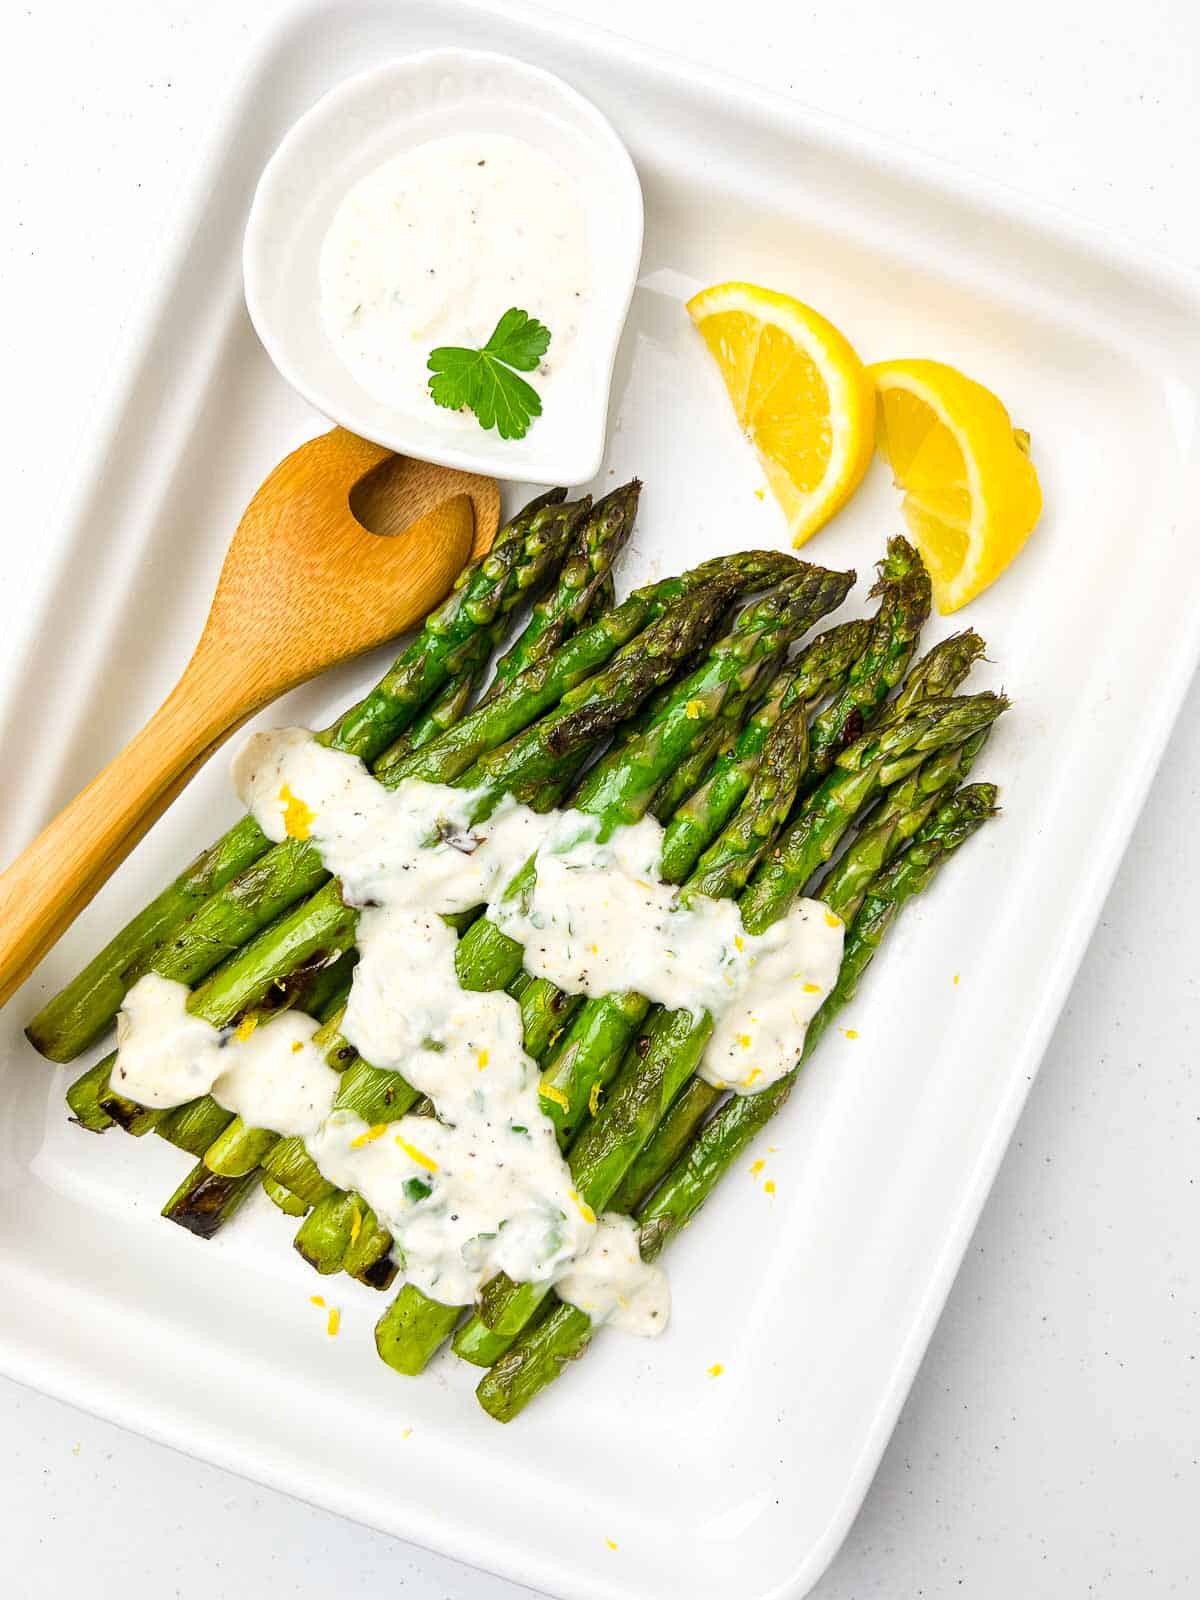 Close up view of asparagus spears on a white platter with lemon garlic aioli and lemon slices.